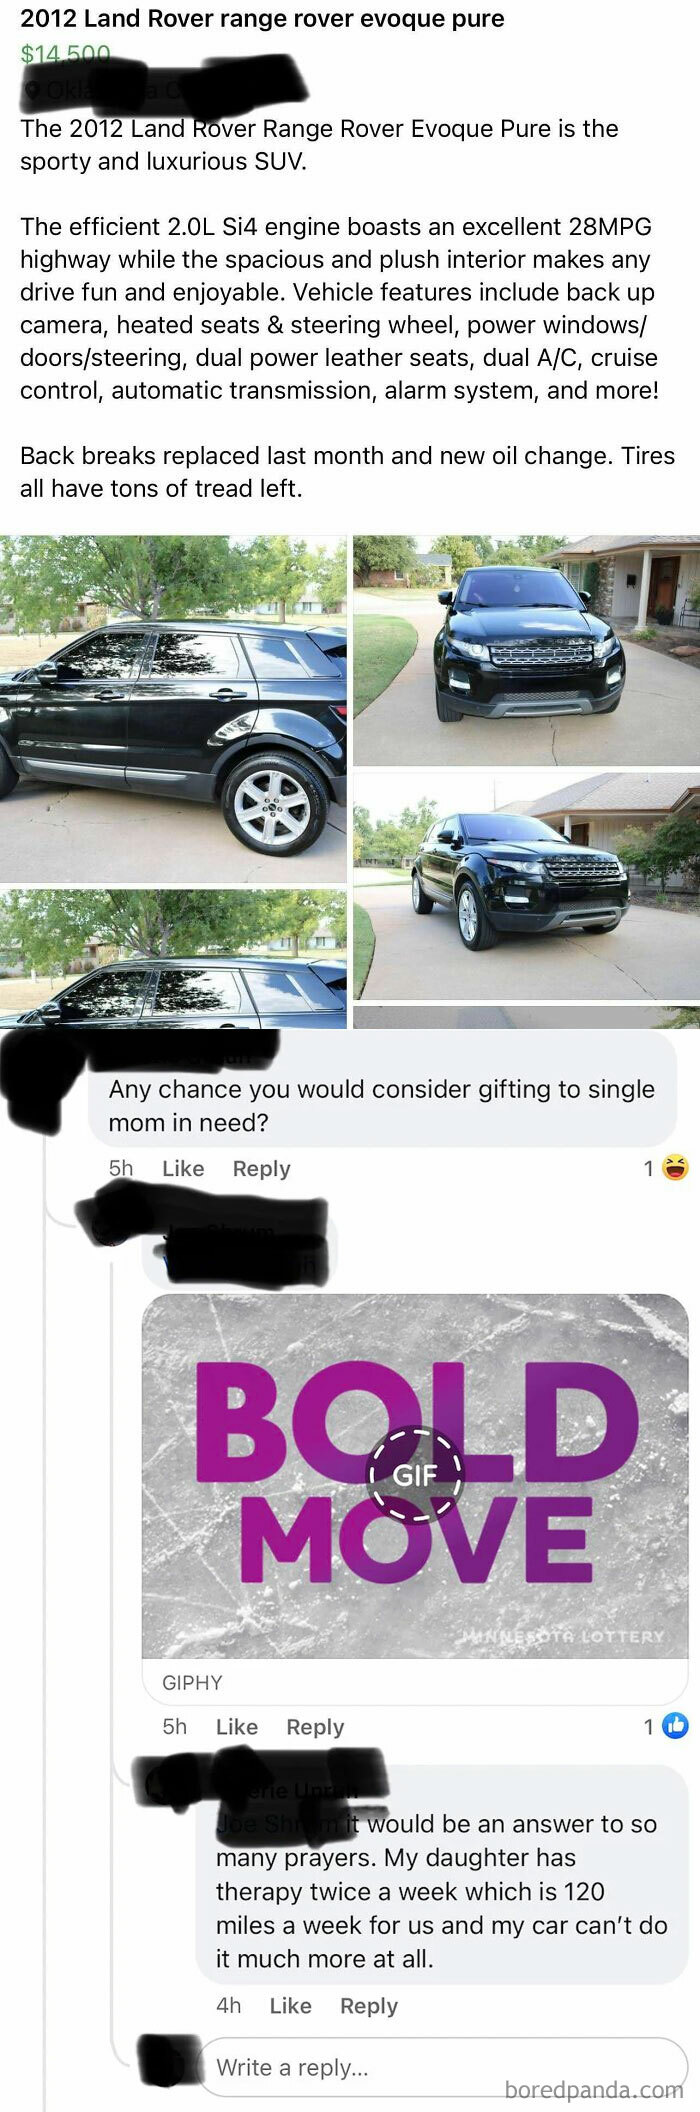 “Would You Consider Gifting Your 14,500 Dollar Car For Sale To A Single Mom In Need? Would Be An Answer To So Many Prayers”